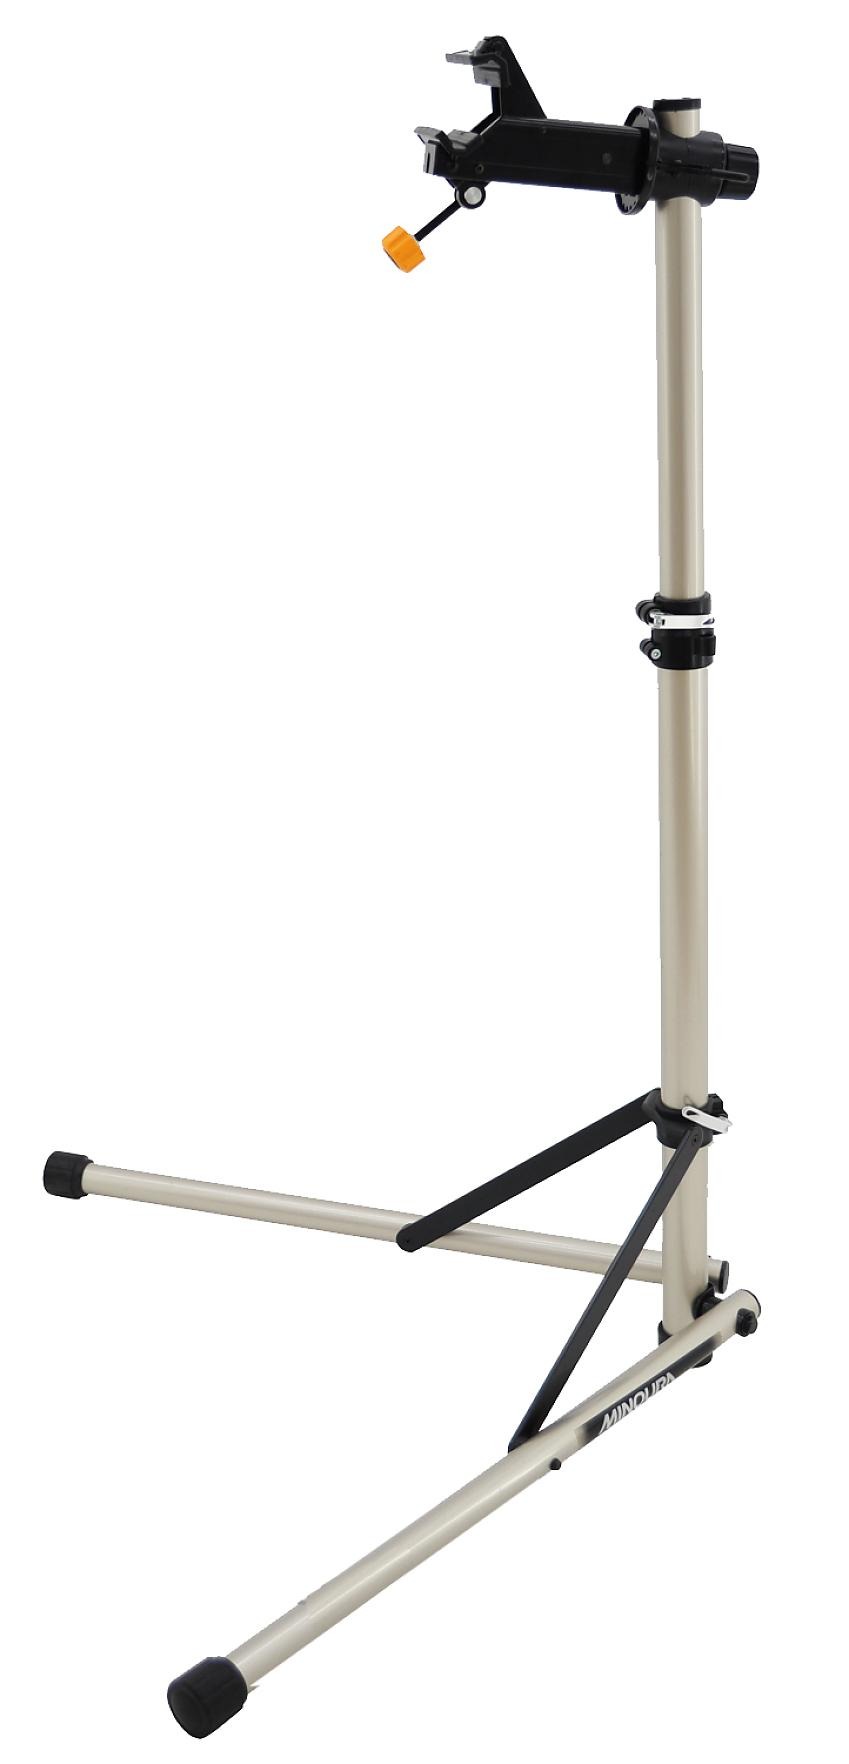 A Minoura RS5000 cycle workstand